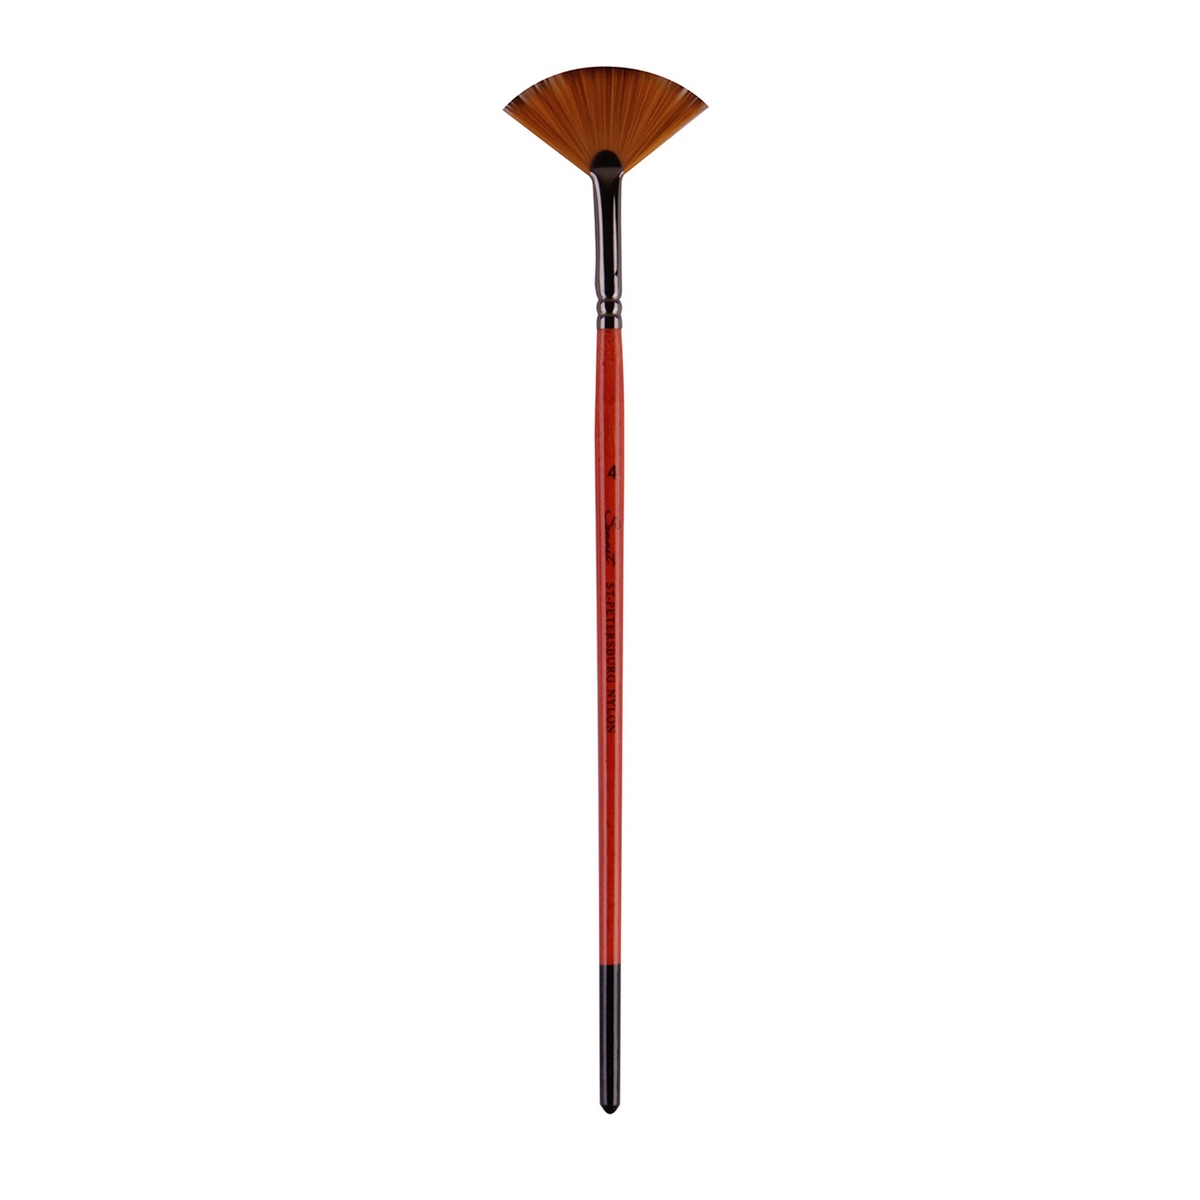 Synthetic "Sonnet" fan brush with a short lacquered handle, two-tone